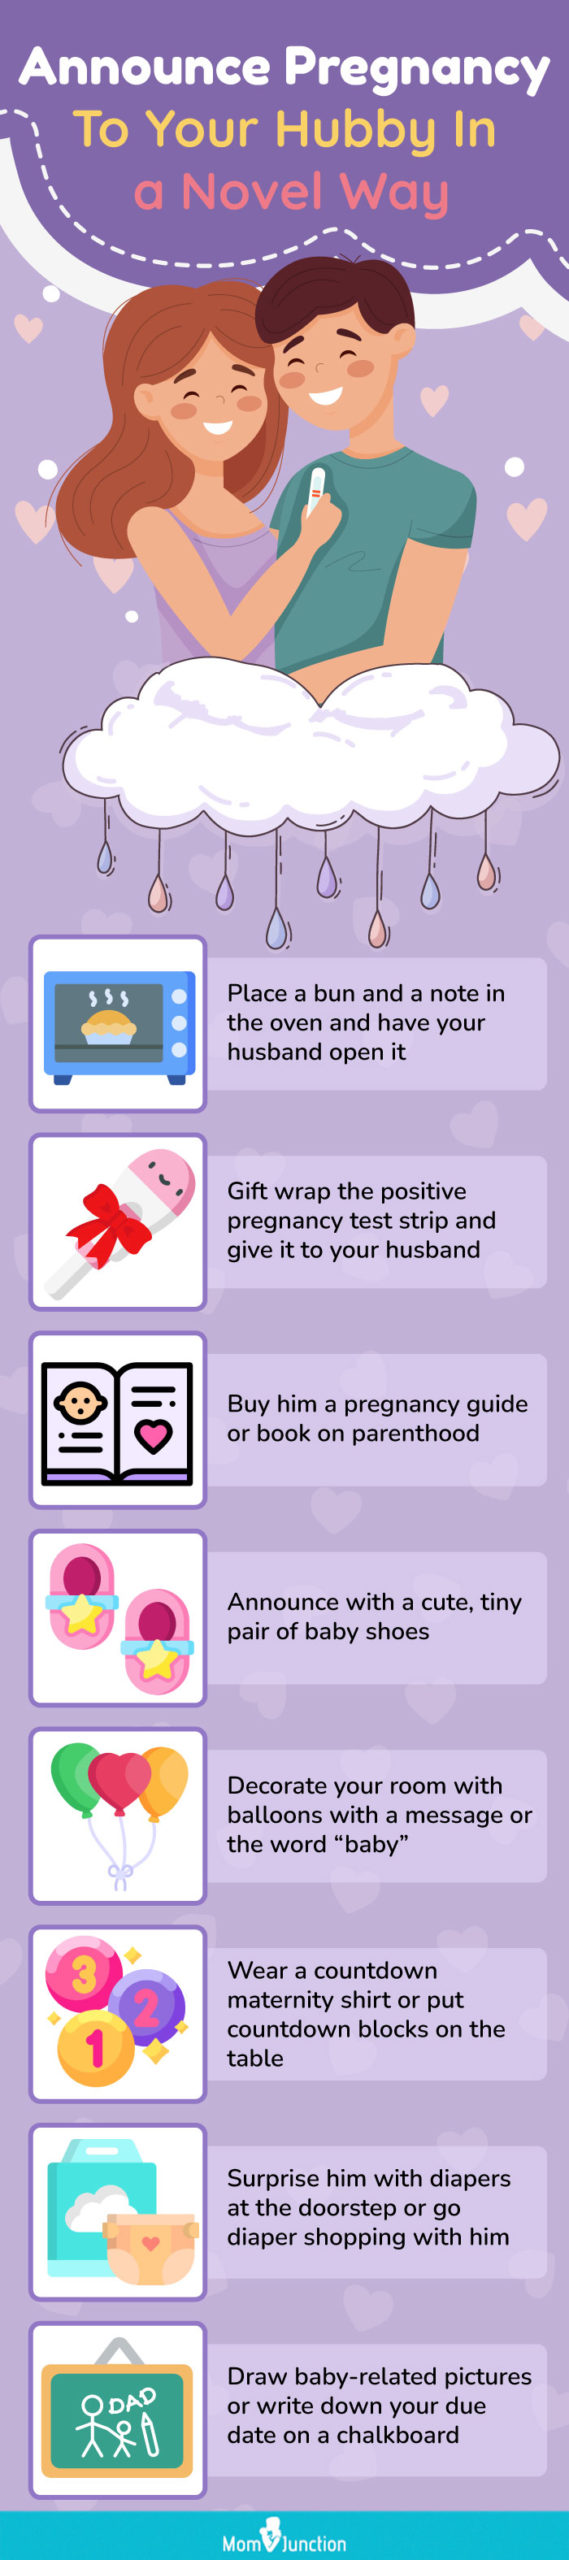 announce pregnancy to your hubby in a novel way (infographic)